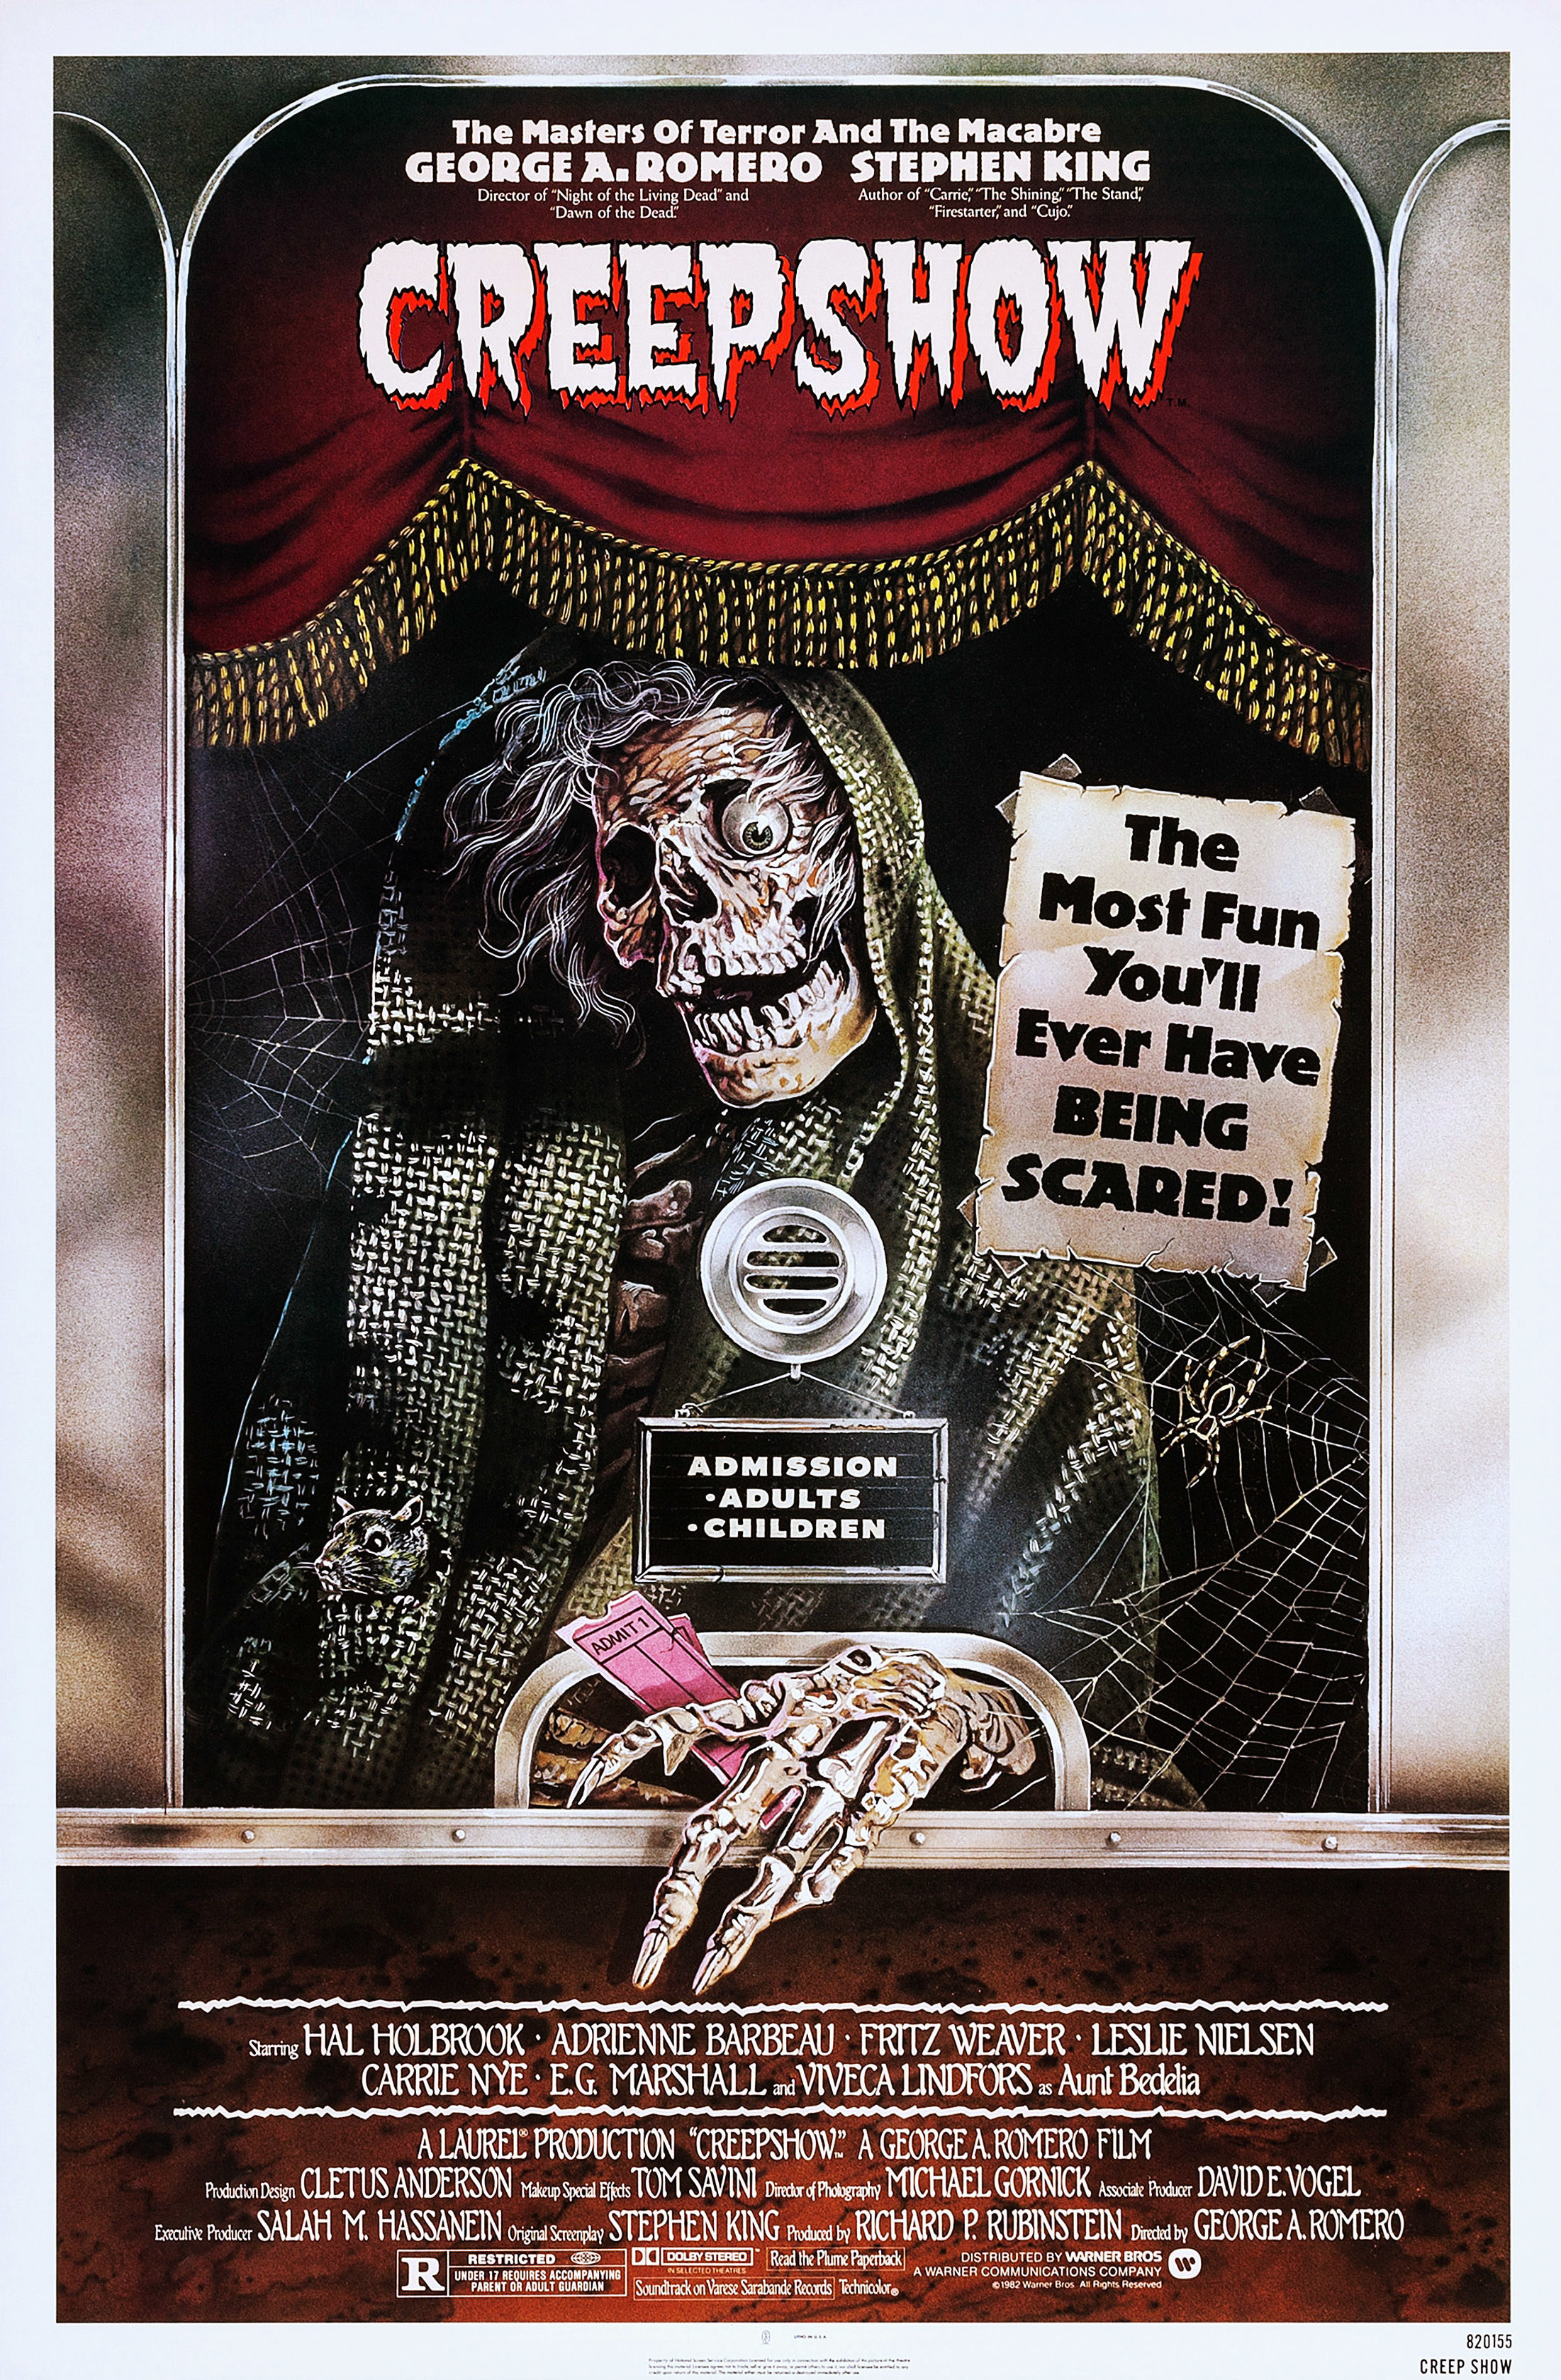 The official poster for &quot;Creepshow&quot; which features a very wacky looking skeleton in a ticket booth, holding out a ticket for you to take 